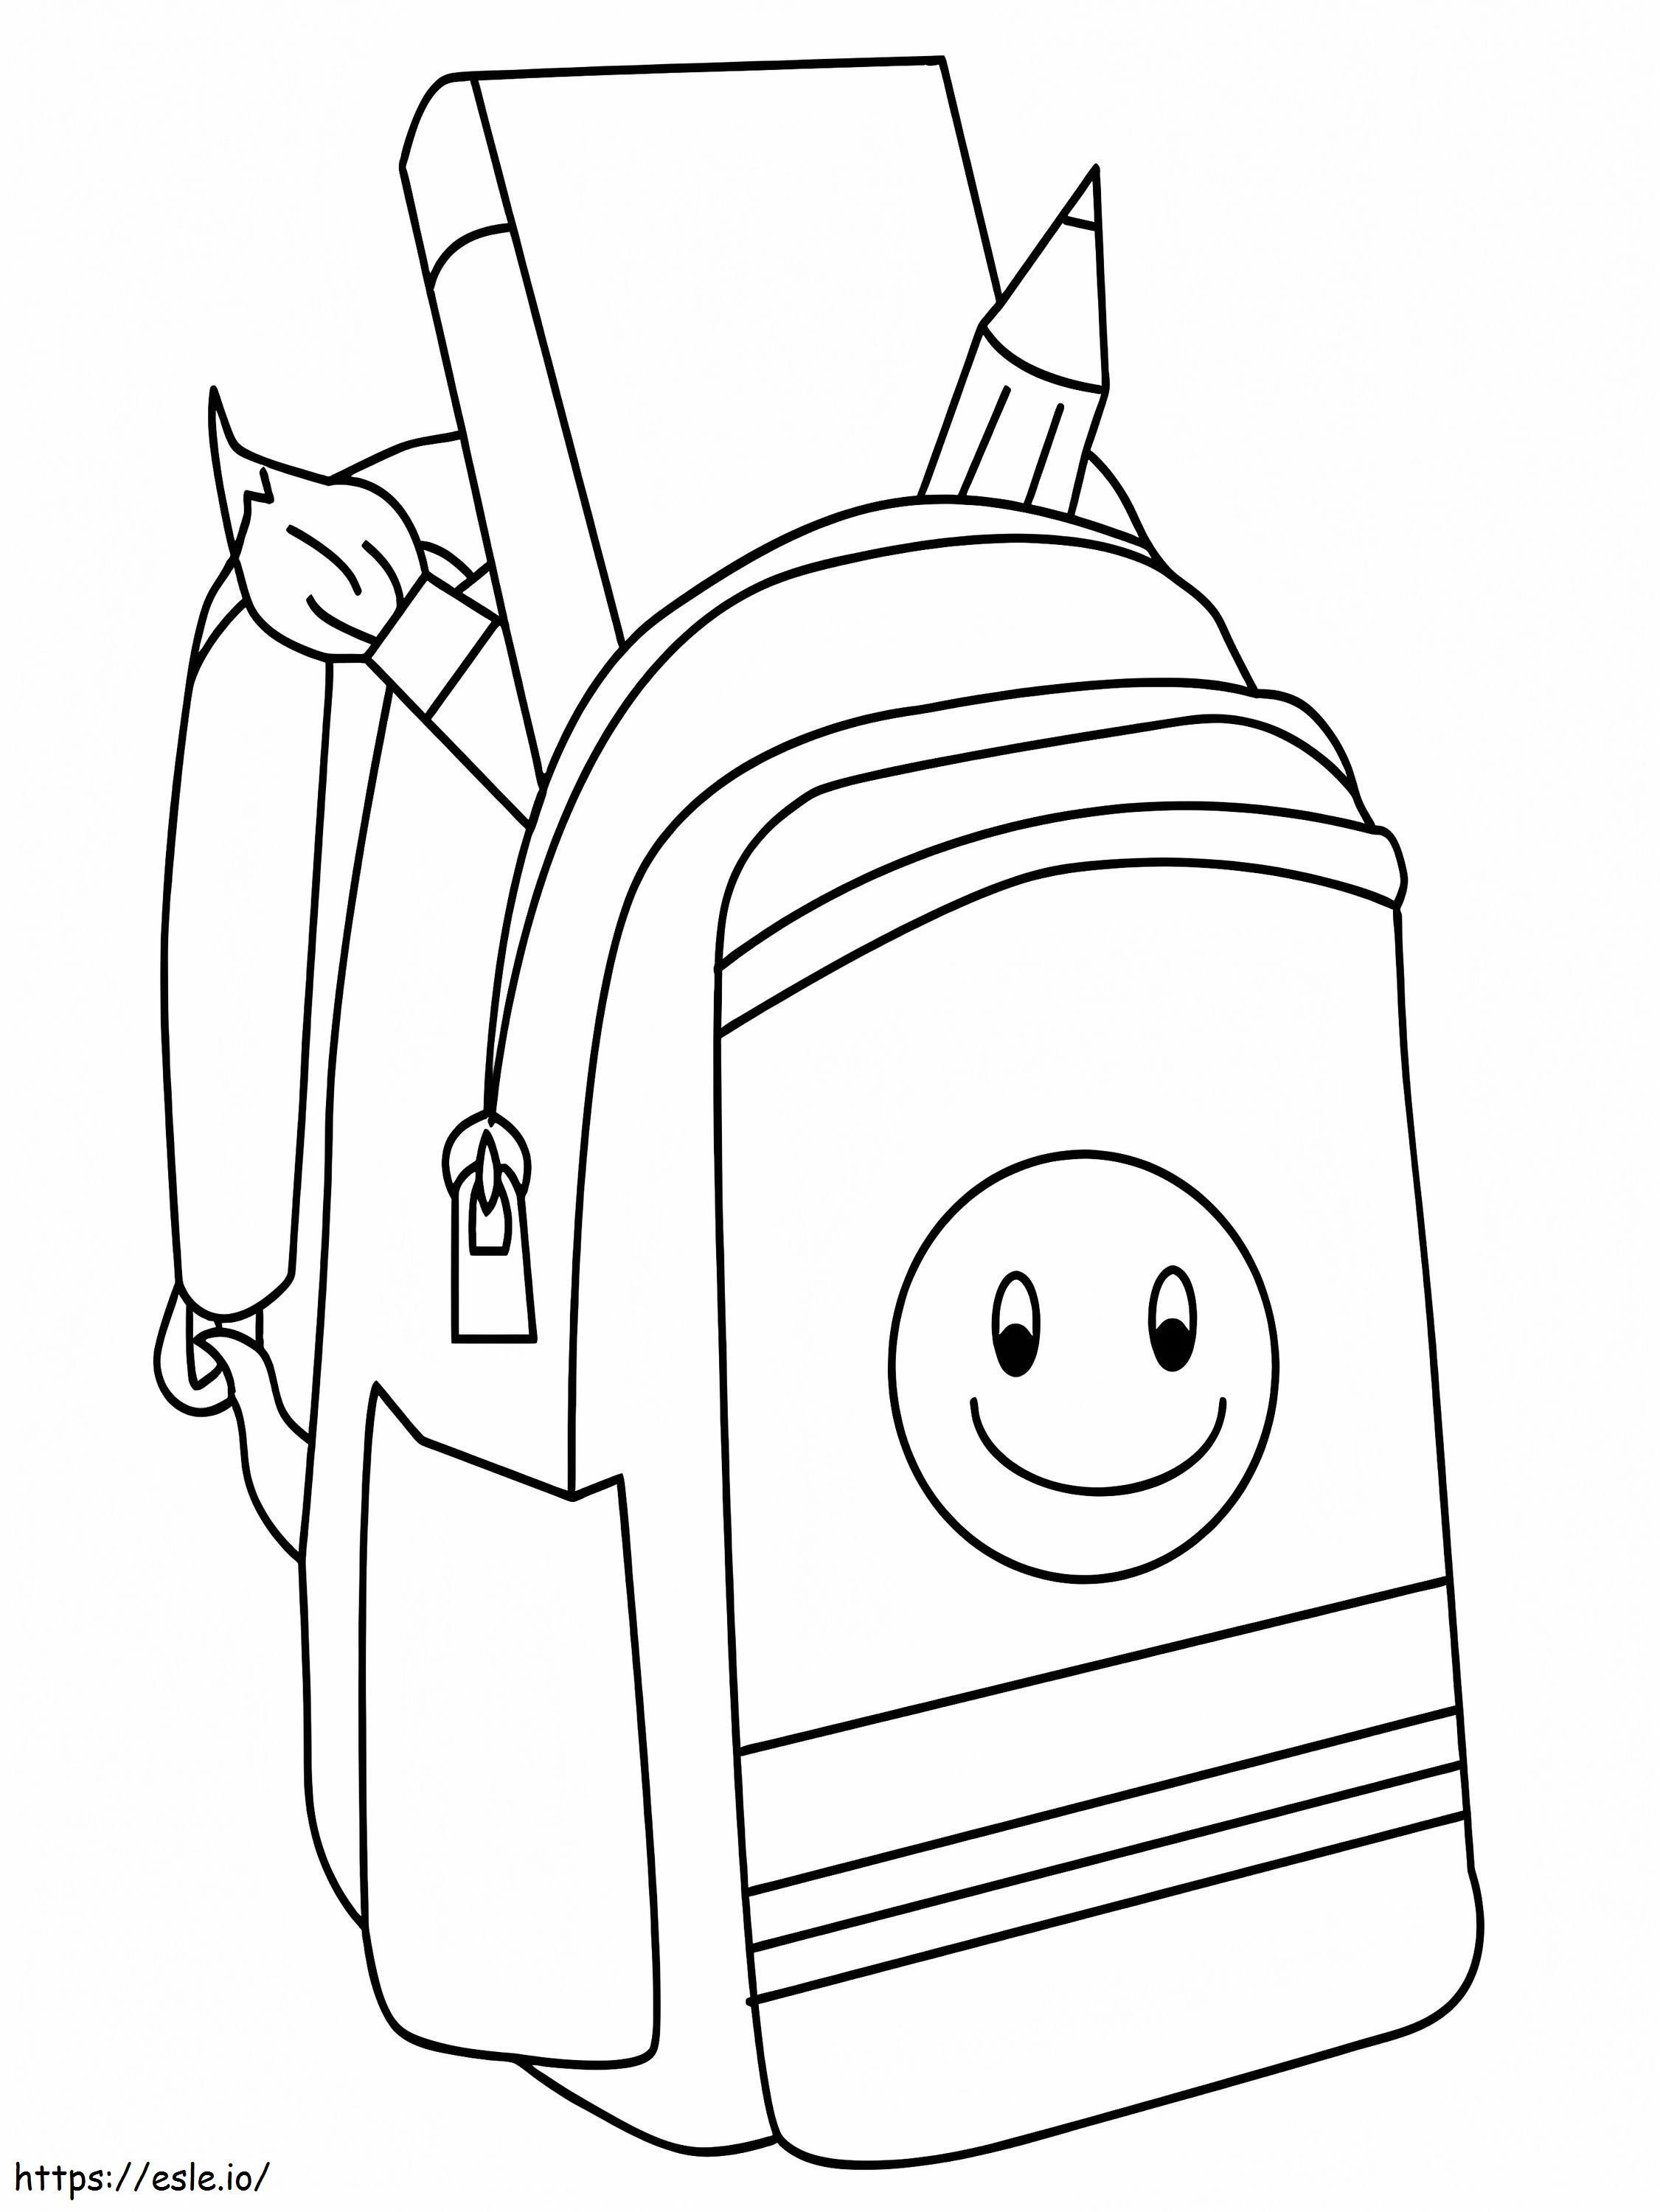 Fabulous First Day Of School Coloring Fun Back To Pages Your Toddler Will Love Color Top Free Printable Online coloring page